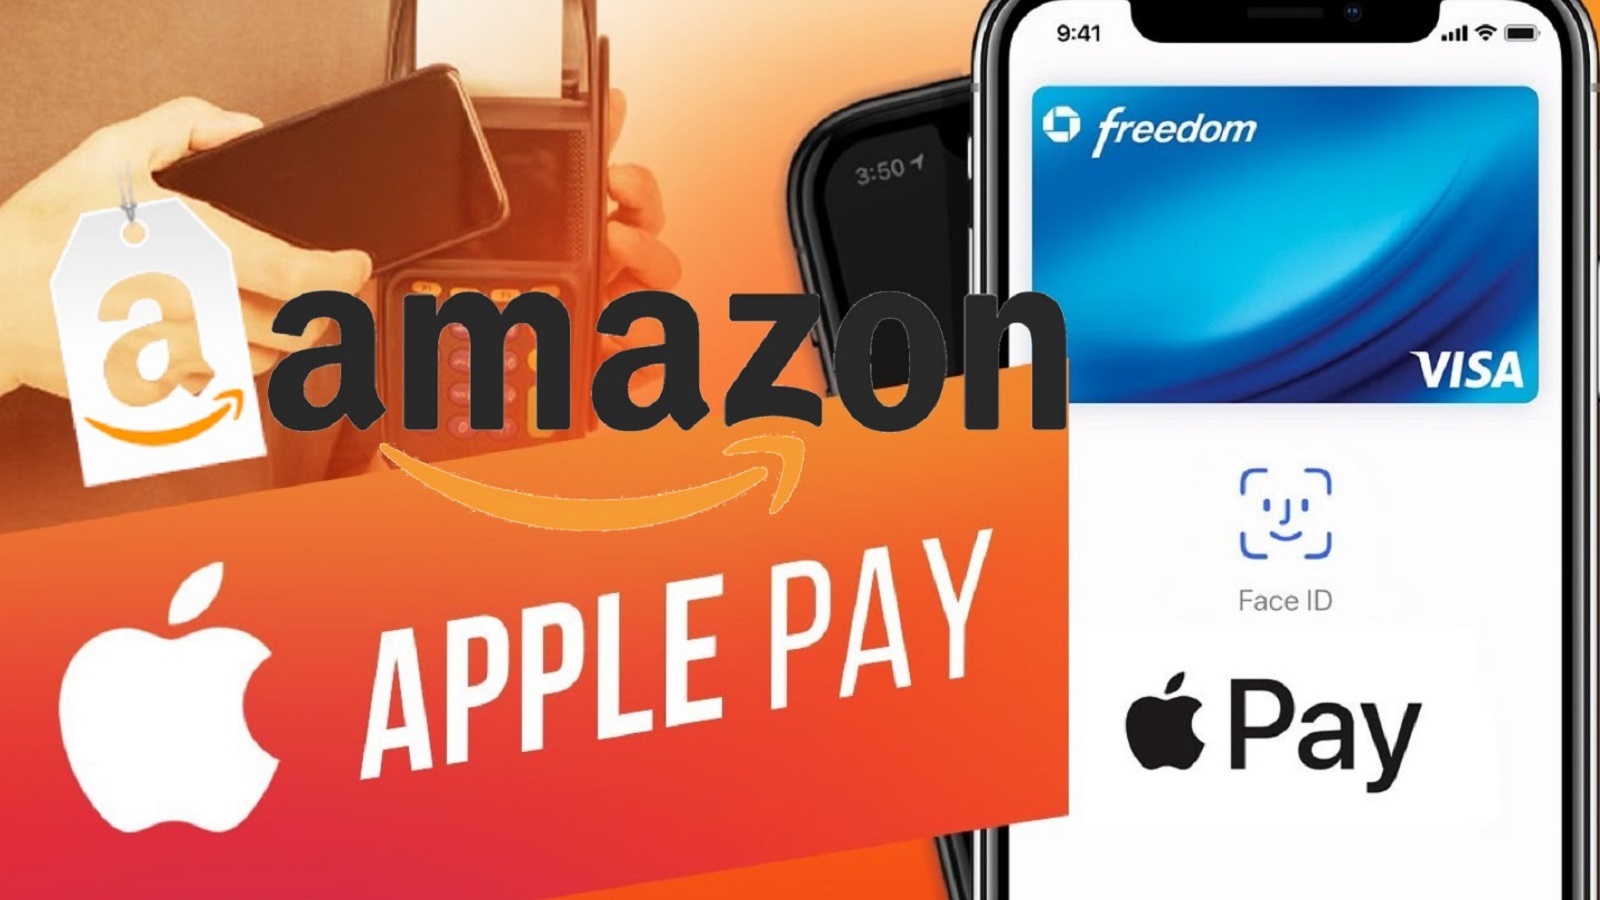 How To Use Apple Pay On Amazon? (Take Apple Card)